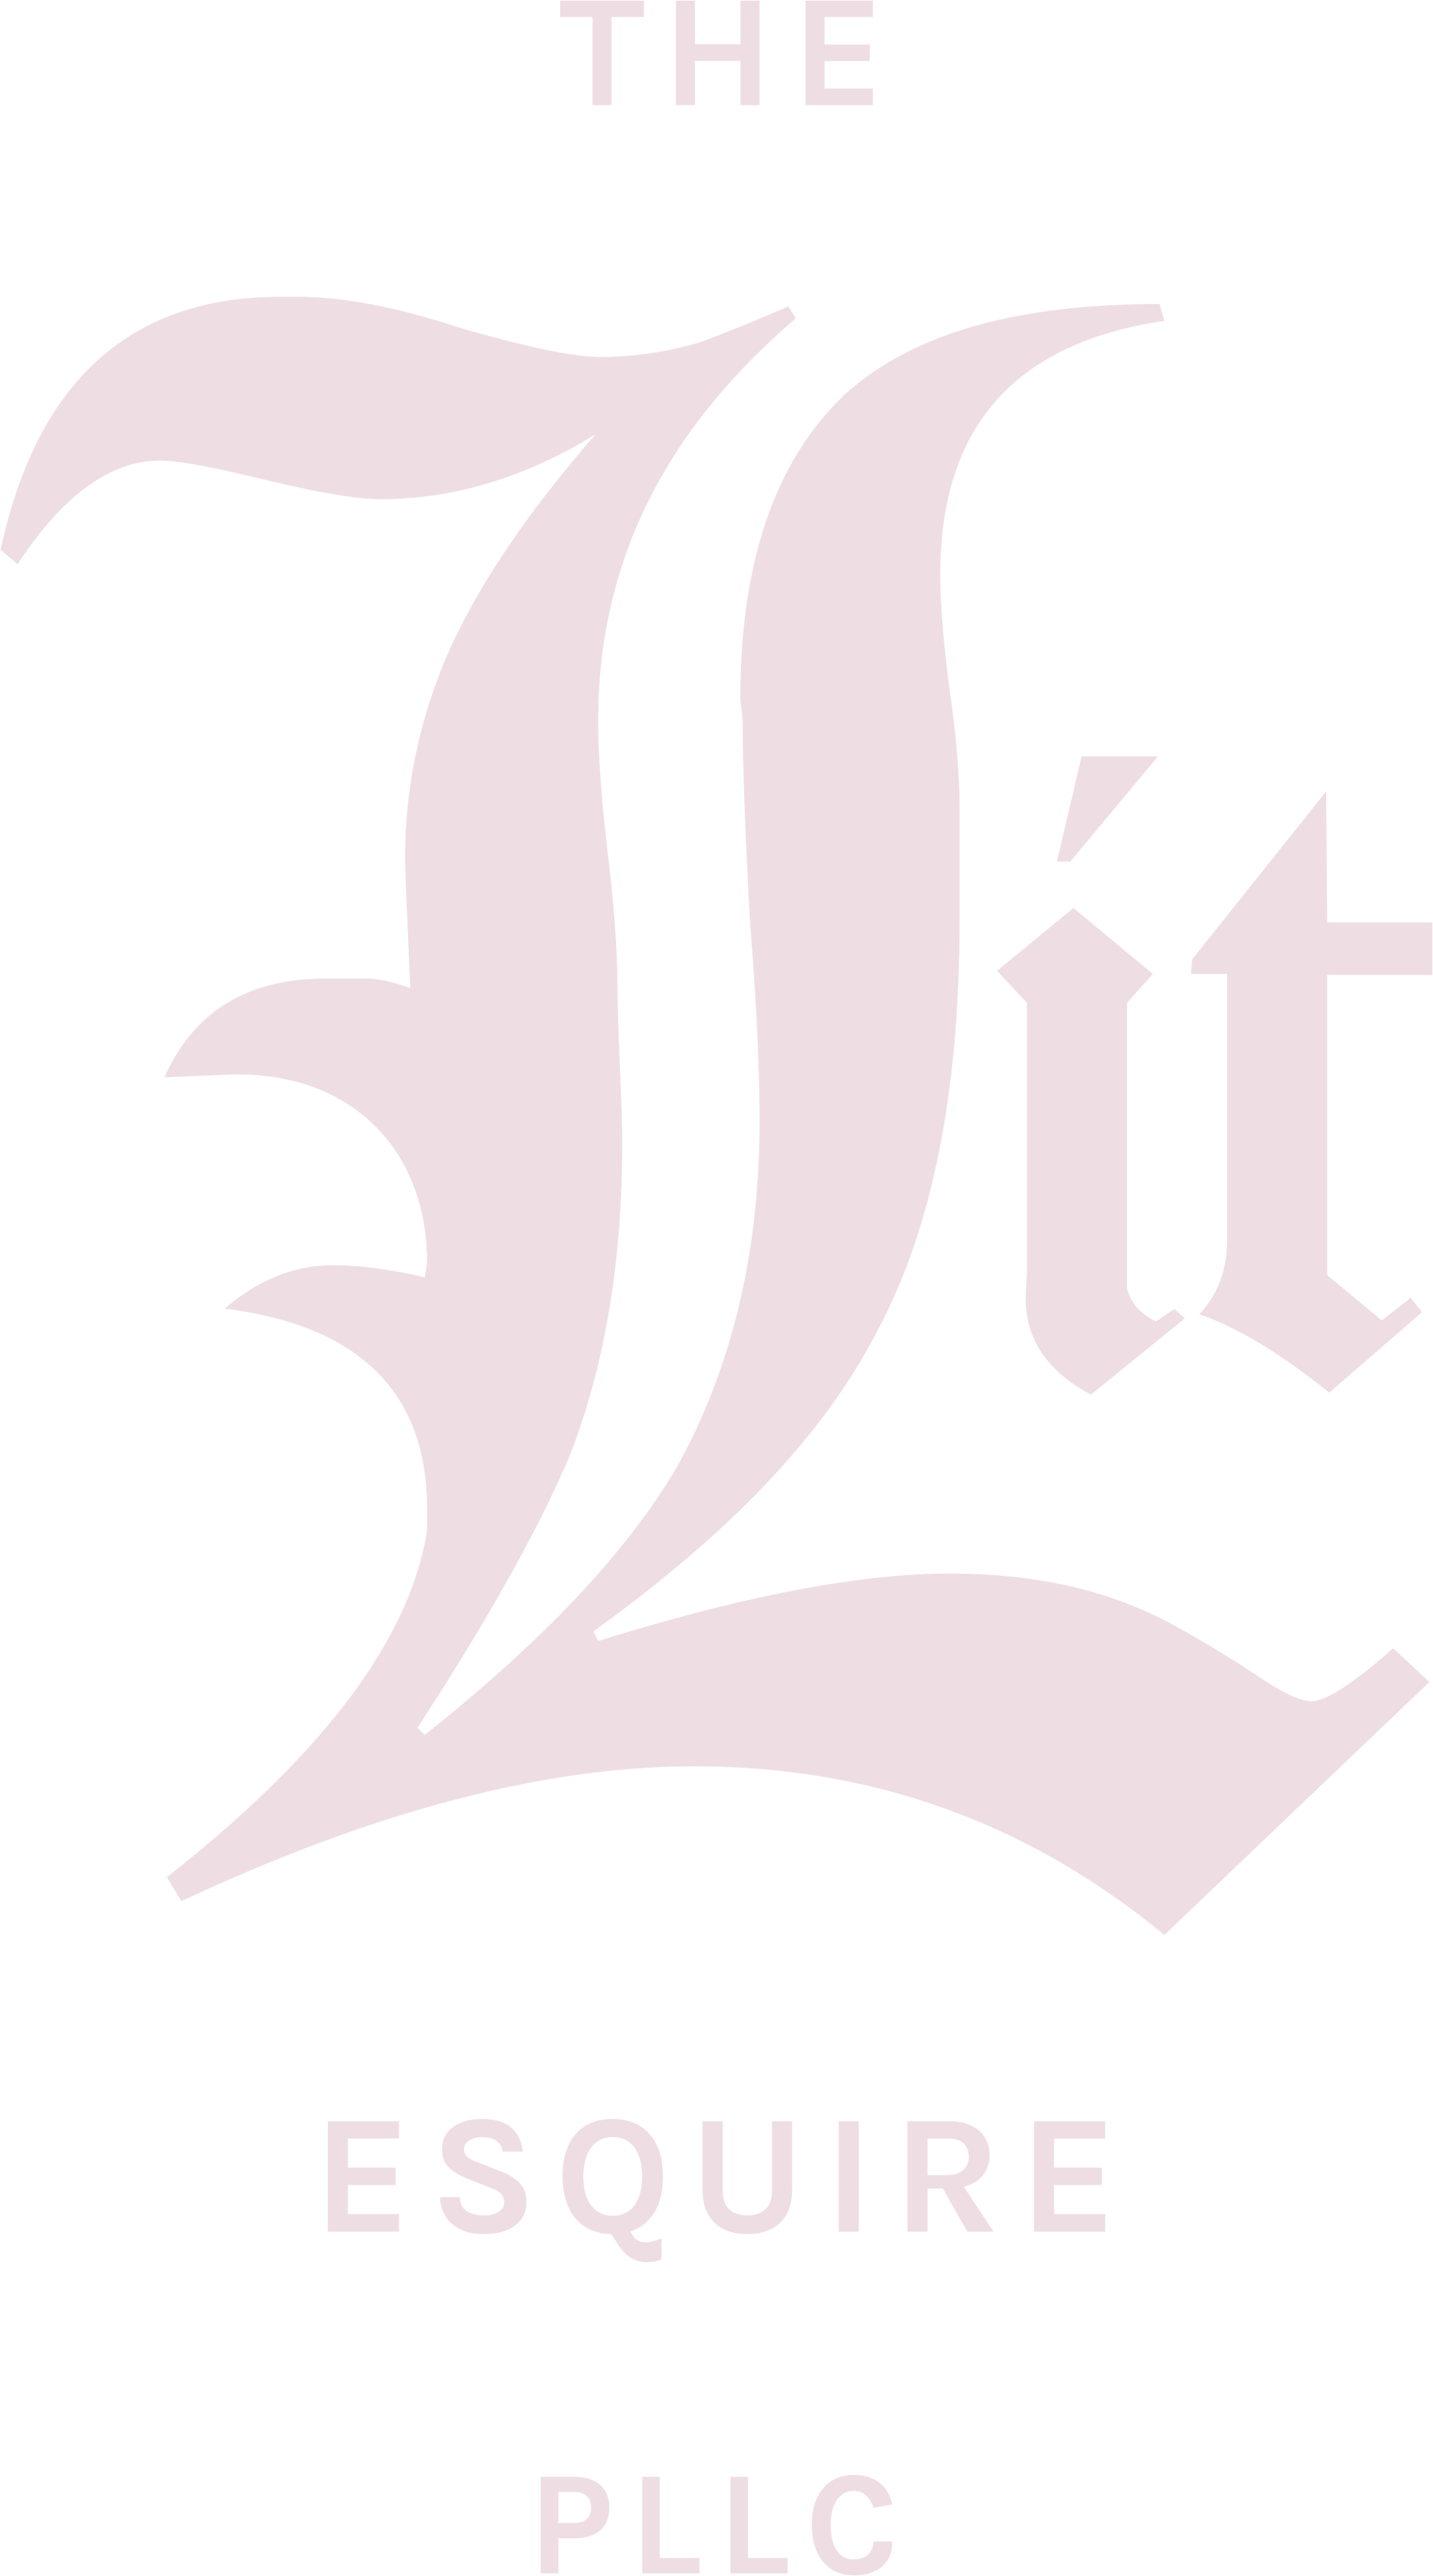 The Lit Esquire logo in GIF format flashing from hot pink to light pink